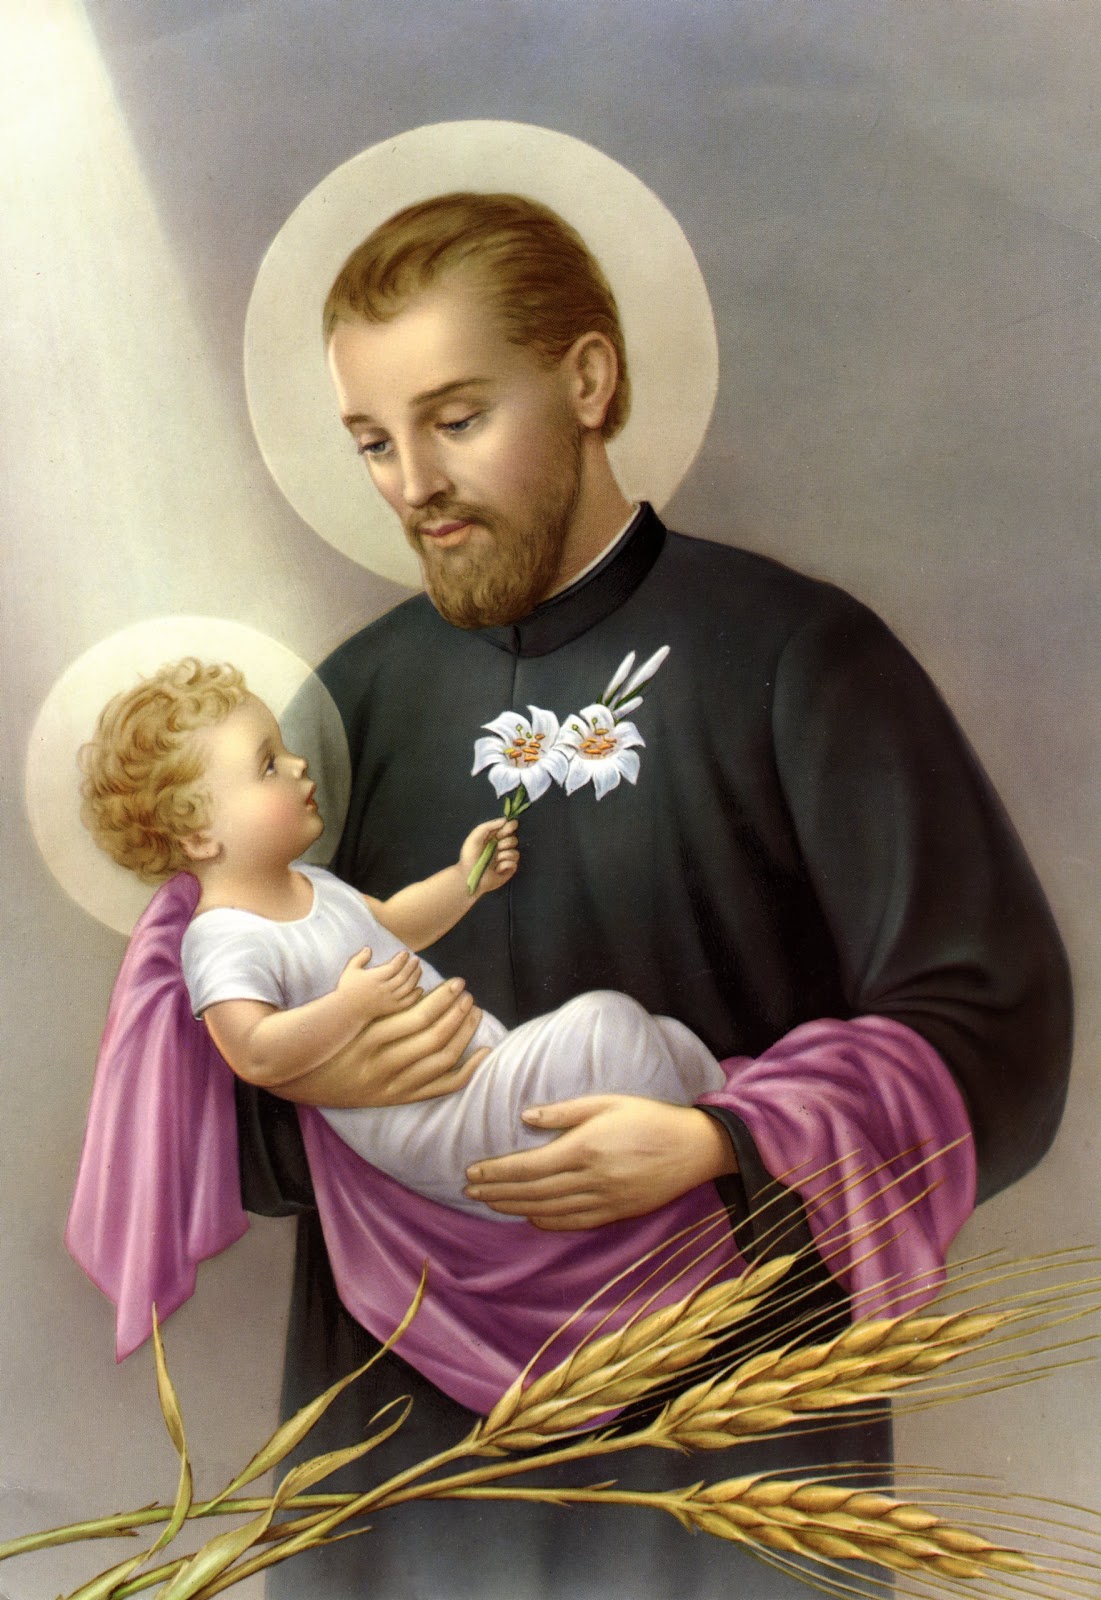 St. Cajetan has traditionally been seen as a patron of gamblers